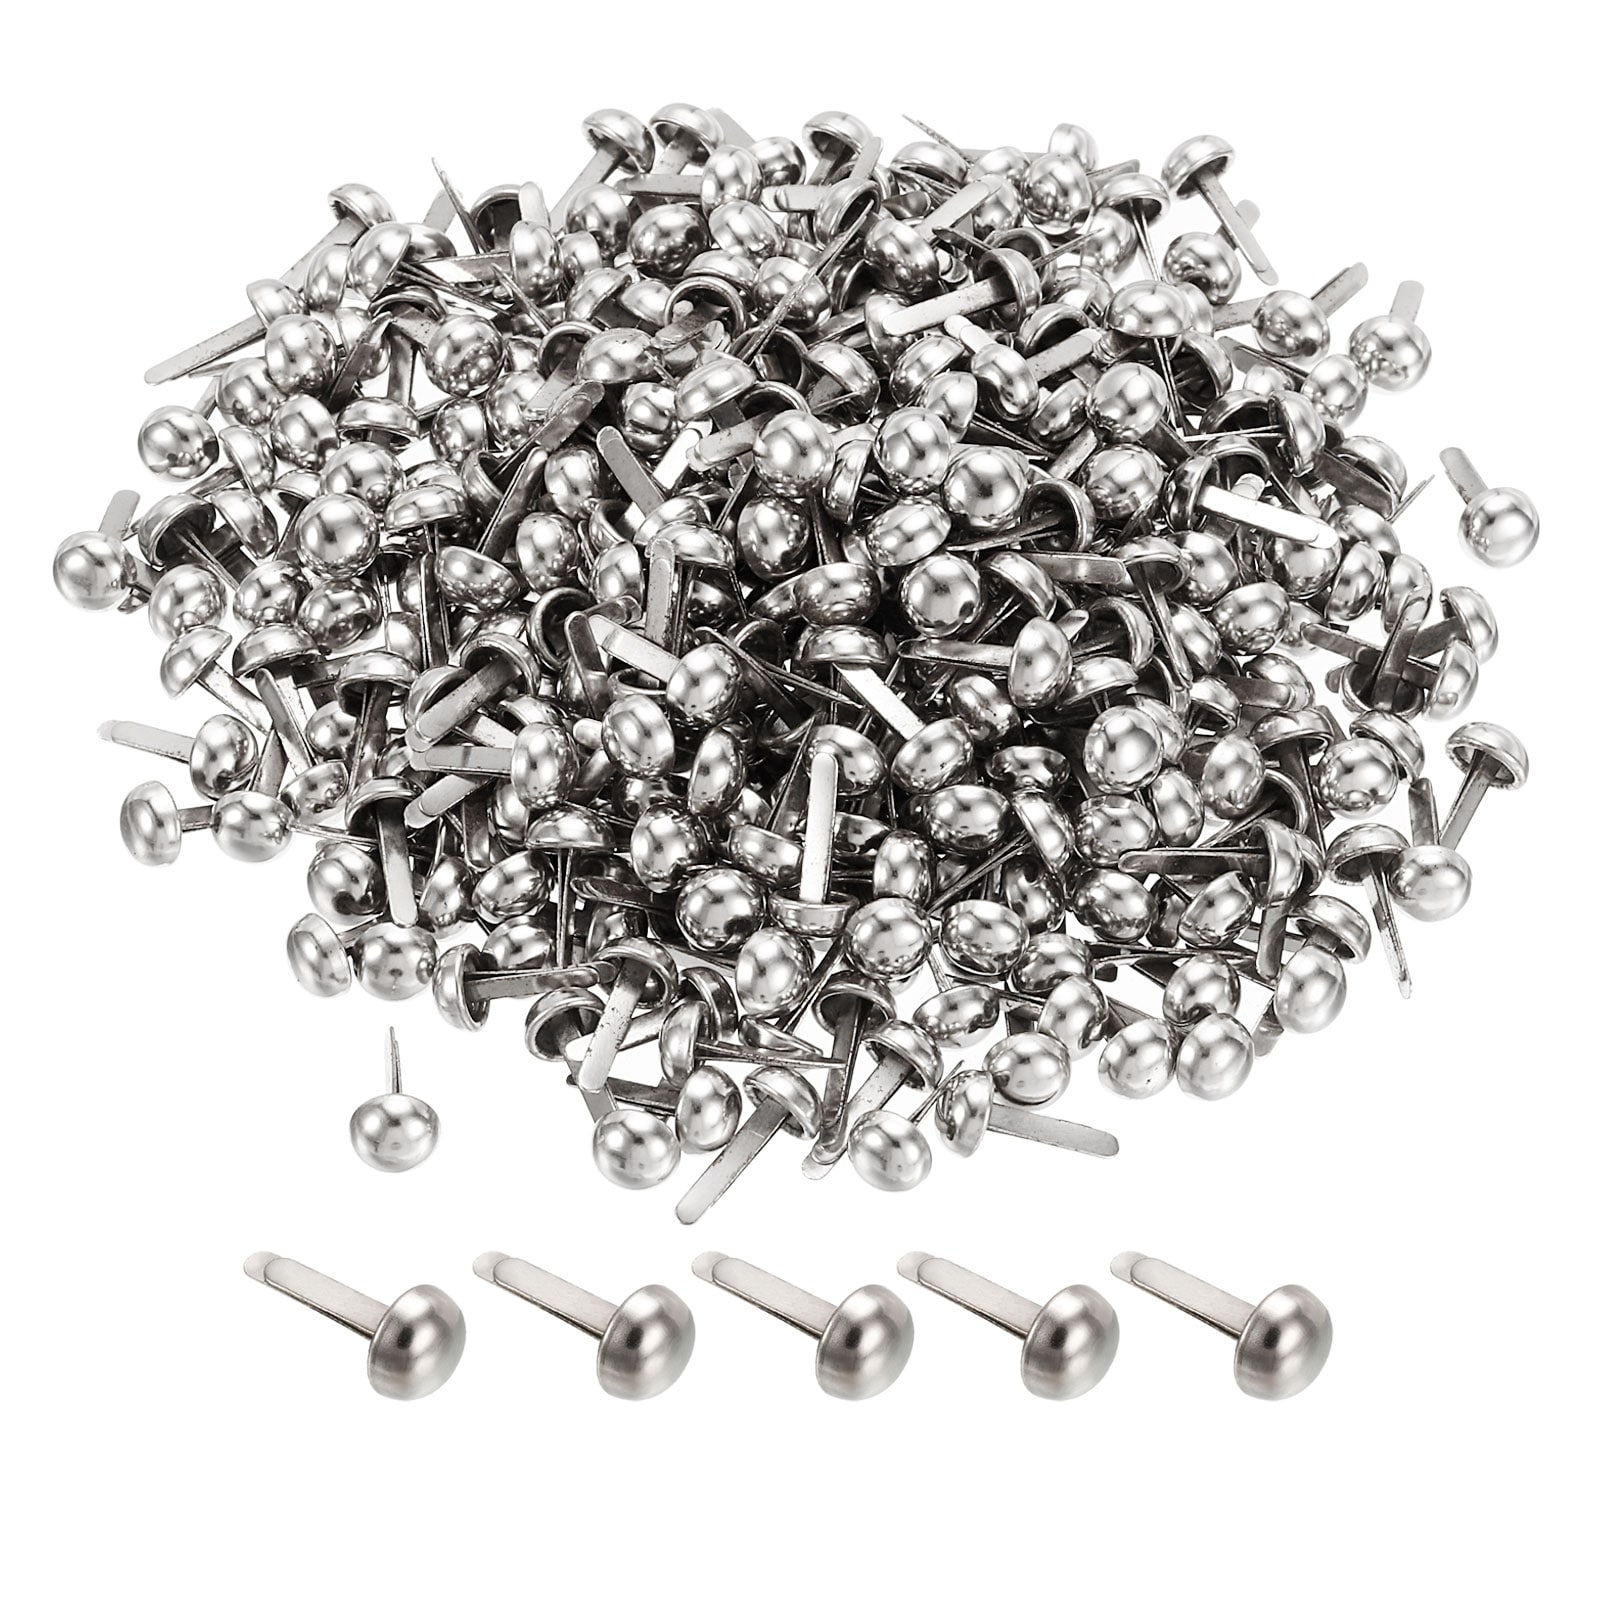 500pcs 6x12mm Mini Brads Round Paper Fasteners for Art Crafting, Silver  Tone - On Sale - Bed Bath & Beyond - 36801190